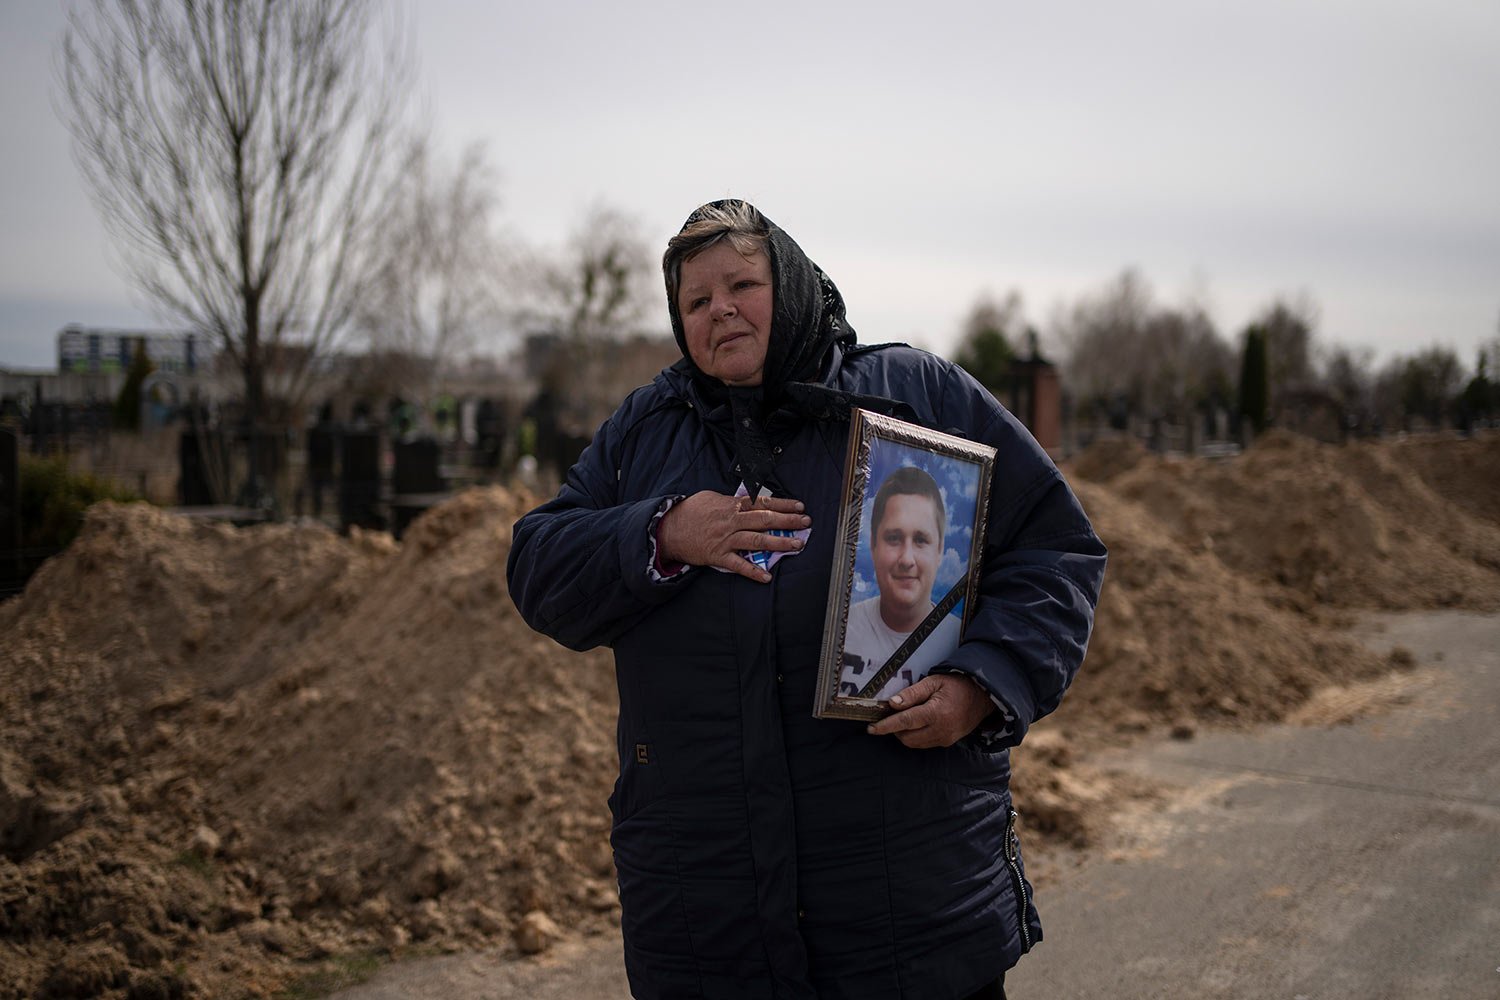  A woman carries the portrait of Dmytro Stefienko, 32, a civilian killed during the war with Russia, during his funeral in Bucha, in the outskirts of Kyiv, Ukraine, Tuesday, April 12, 2022. (AP Photo/Rodrigo Abd) 